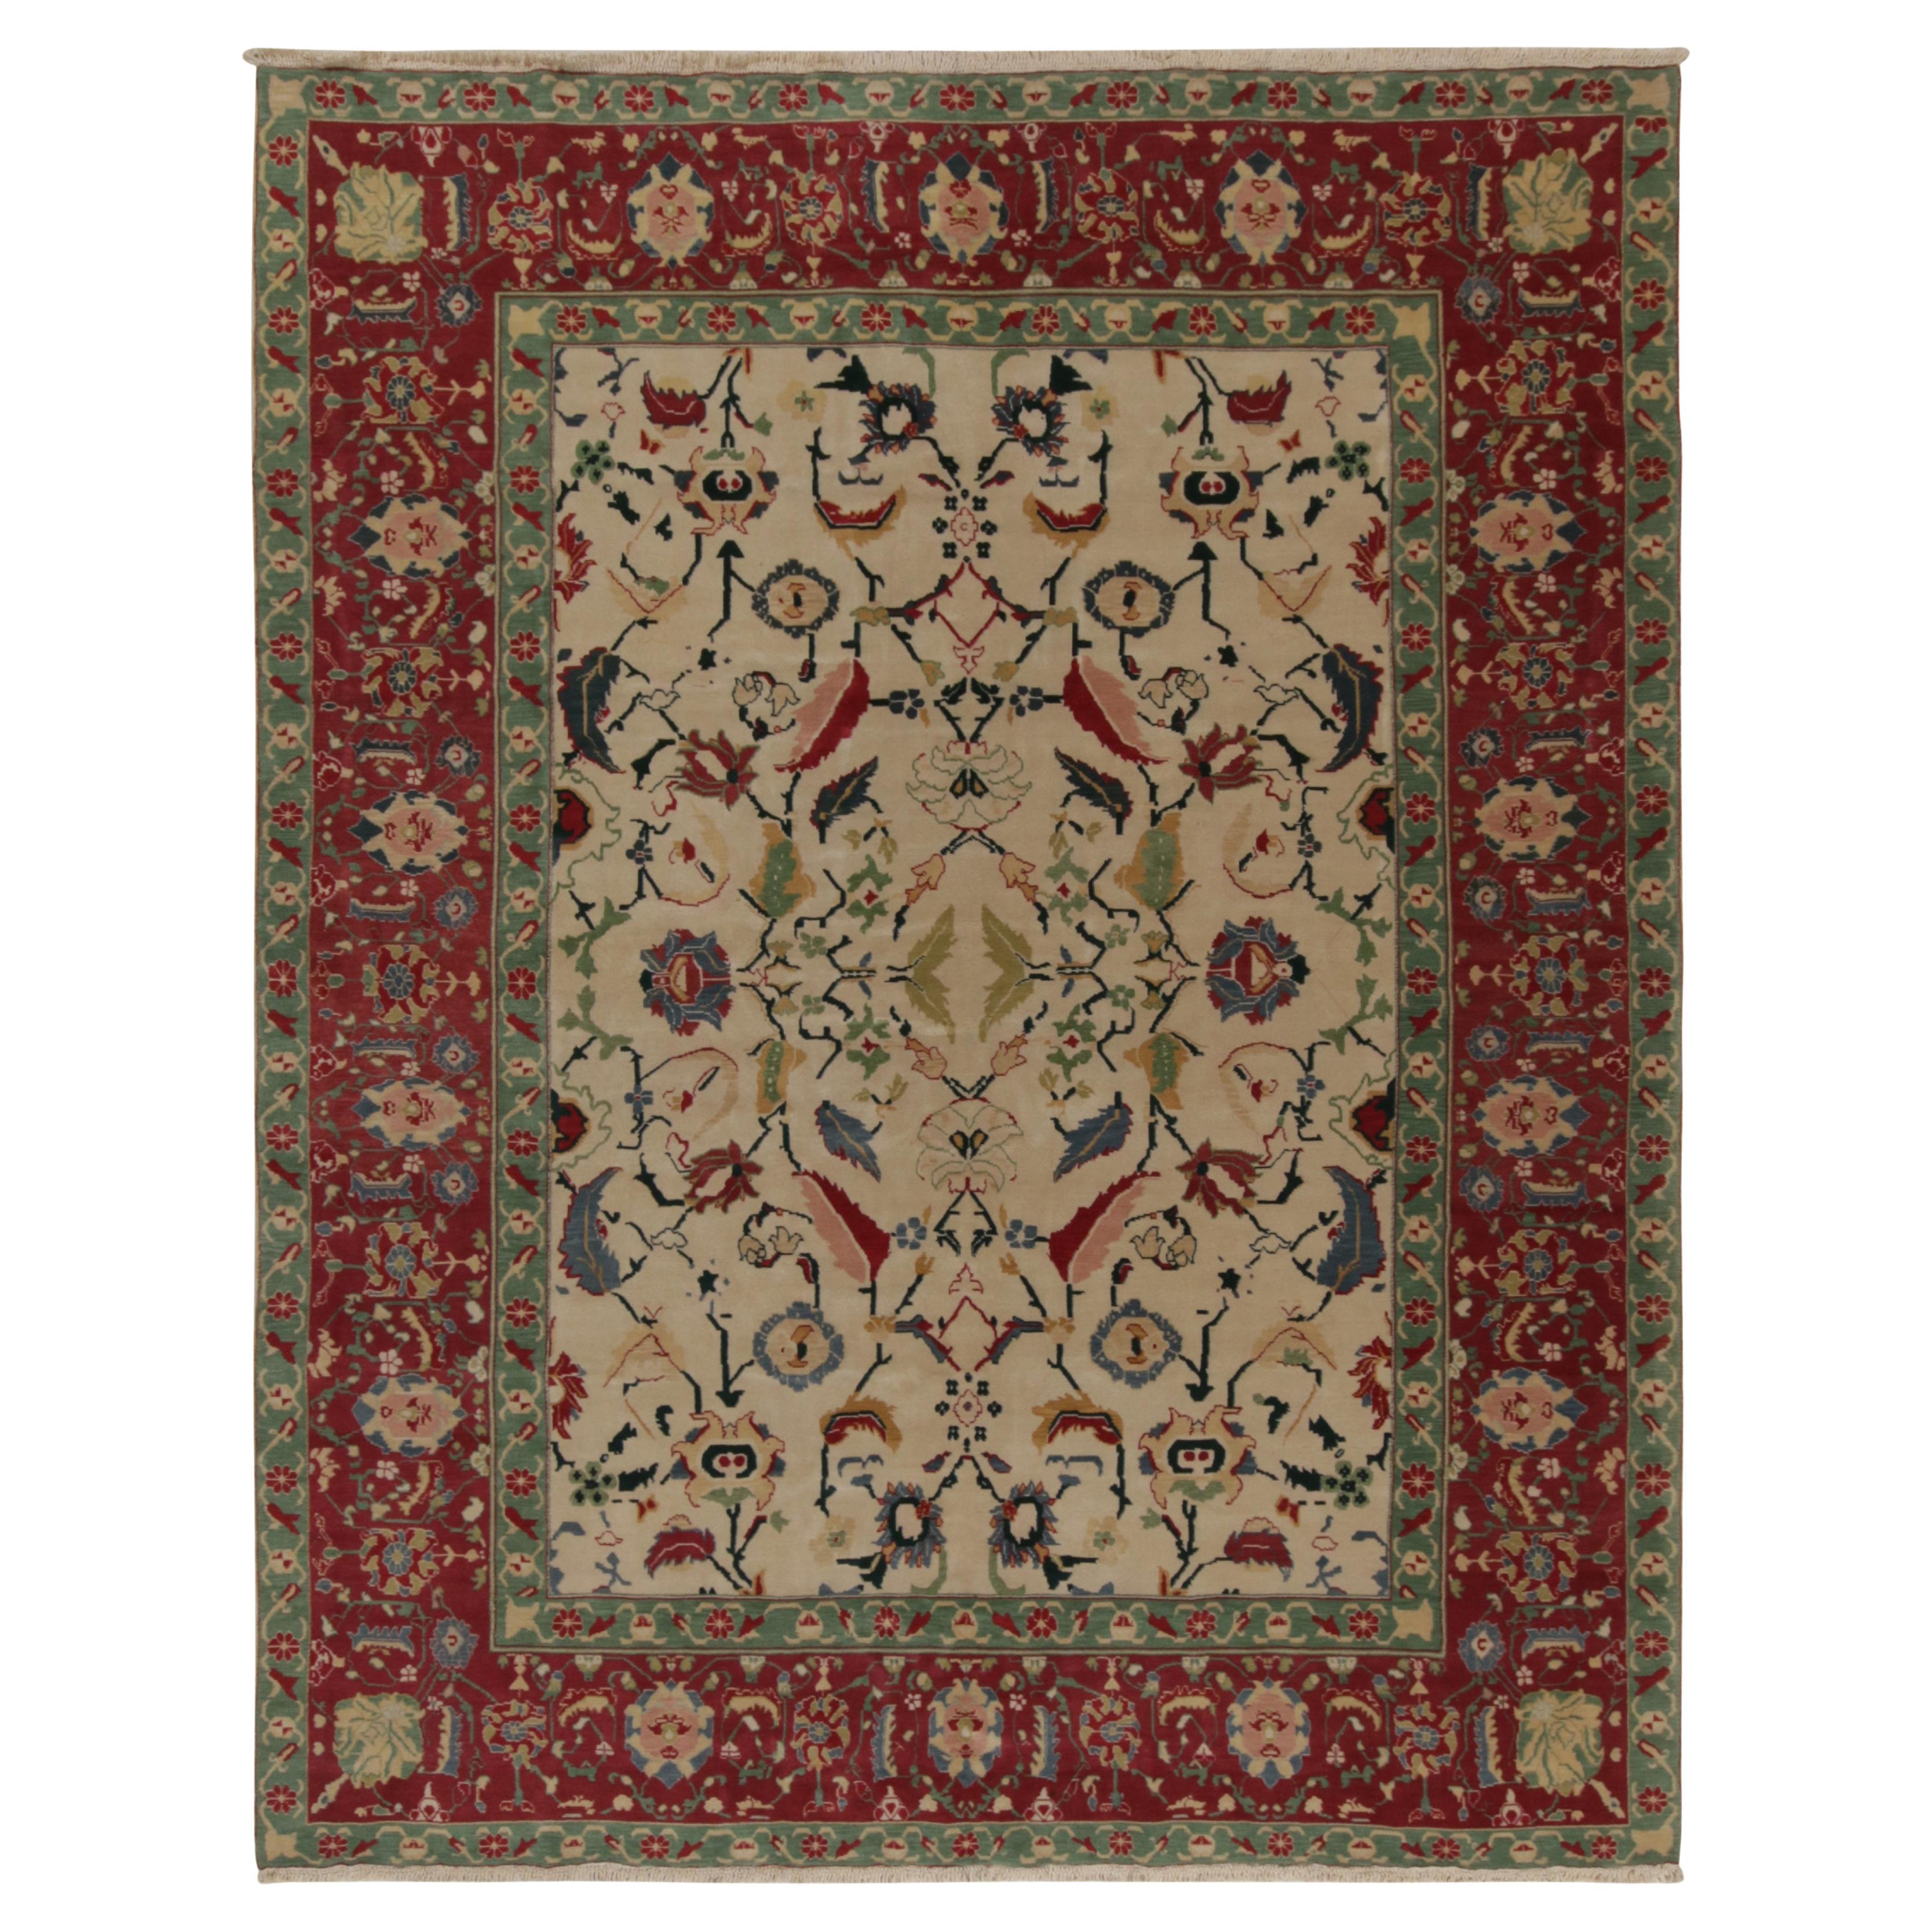 Rug & Kilim’s Traditional Agra style rug in Beige, Red and Teal Floral Pattern For Sale